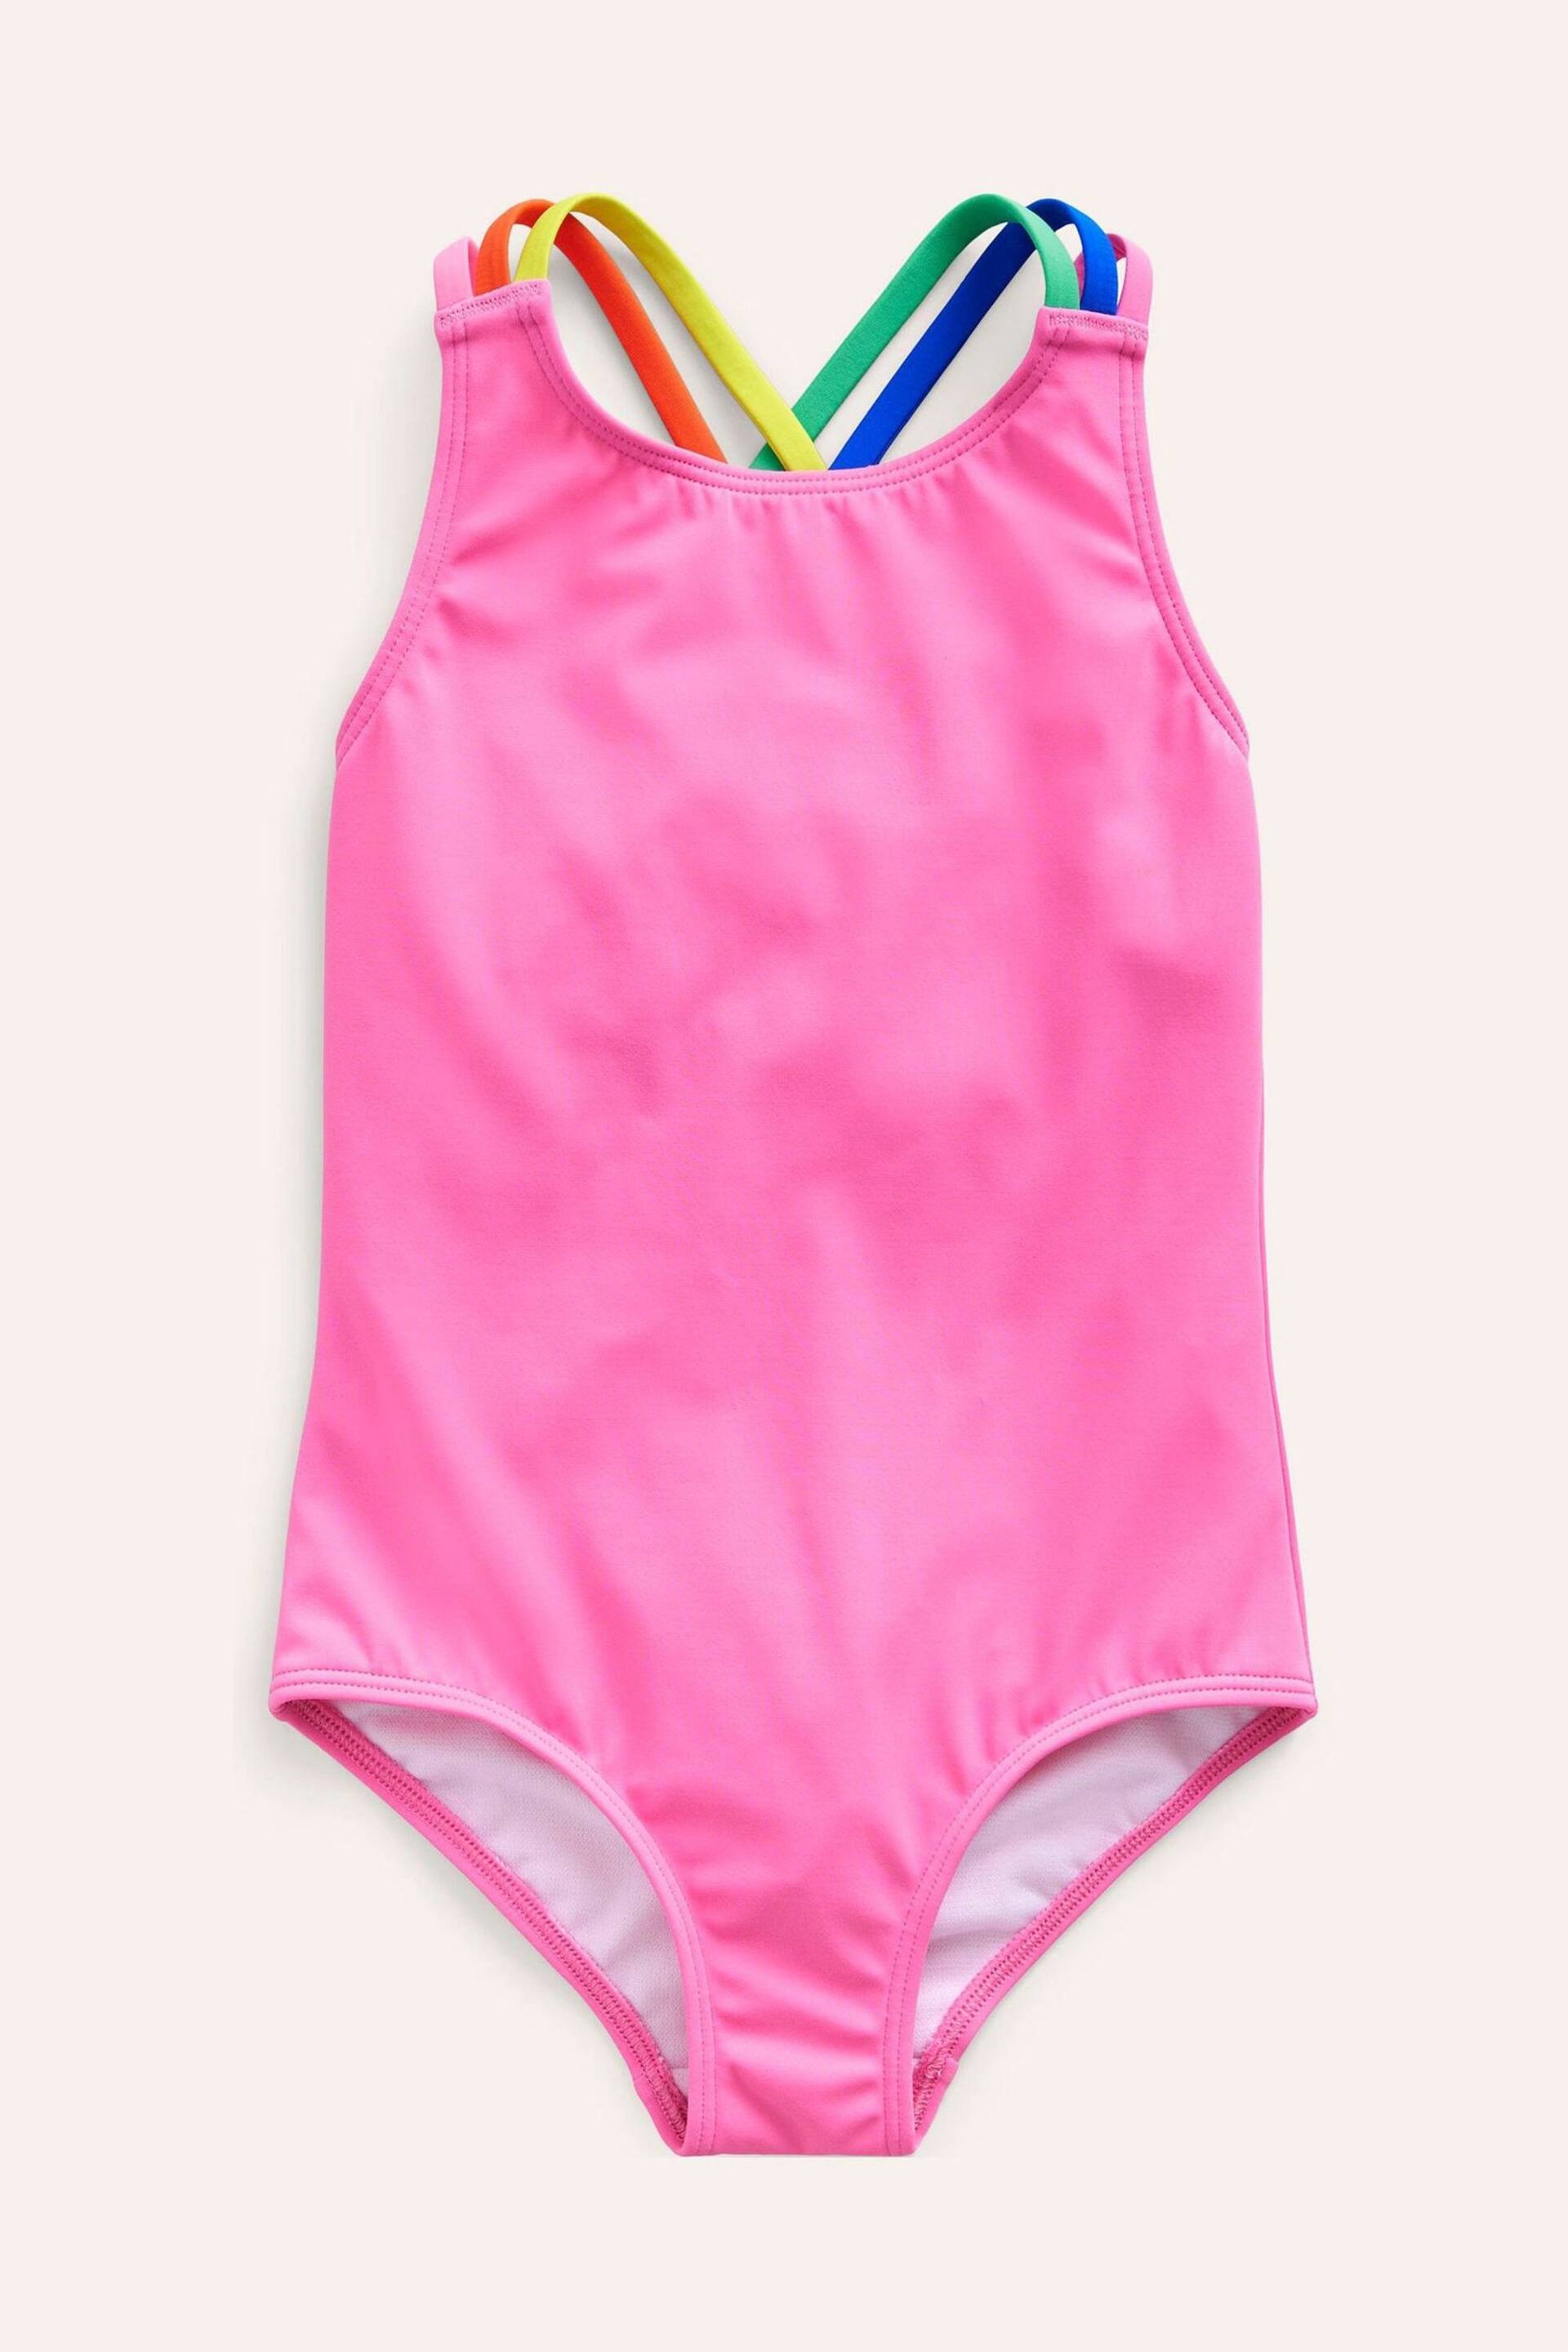 Boden Pink Rainbow Cross-Back Swimsuit - Image 1 of 3